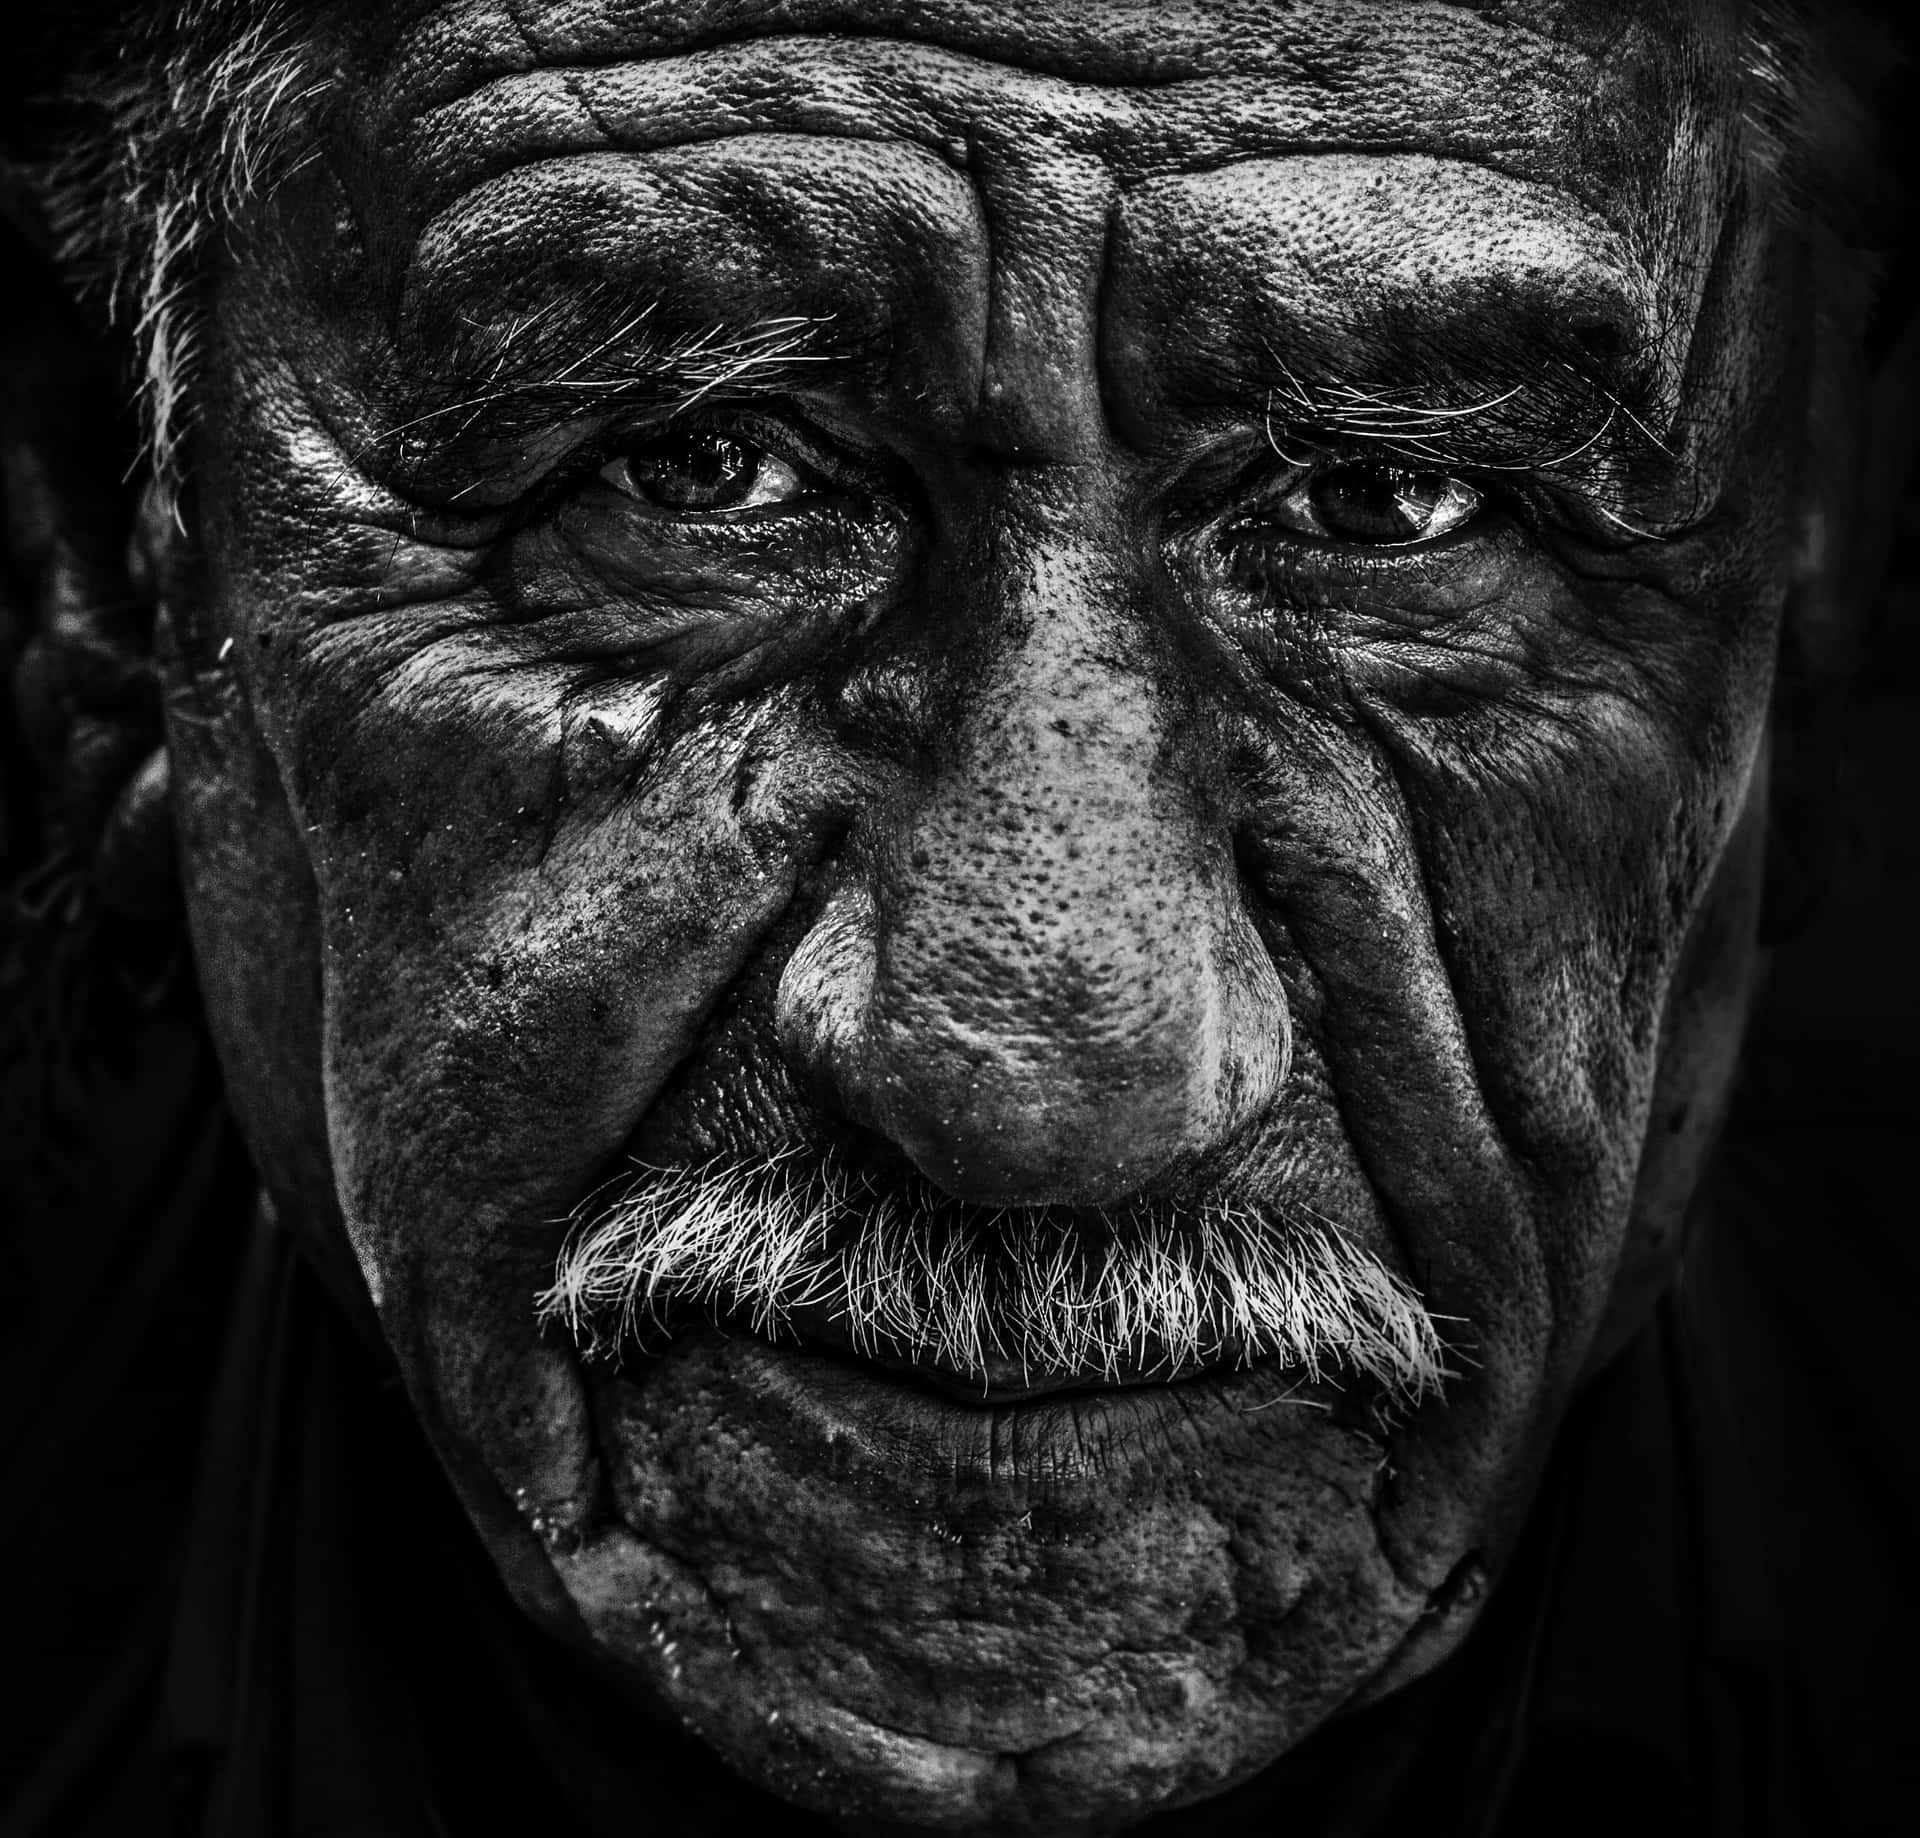 Portrait of an Elderly Man with Rugged Features Wallpaper